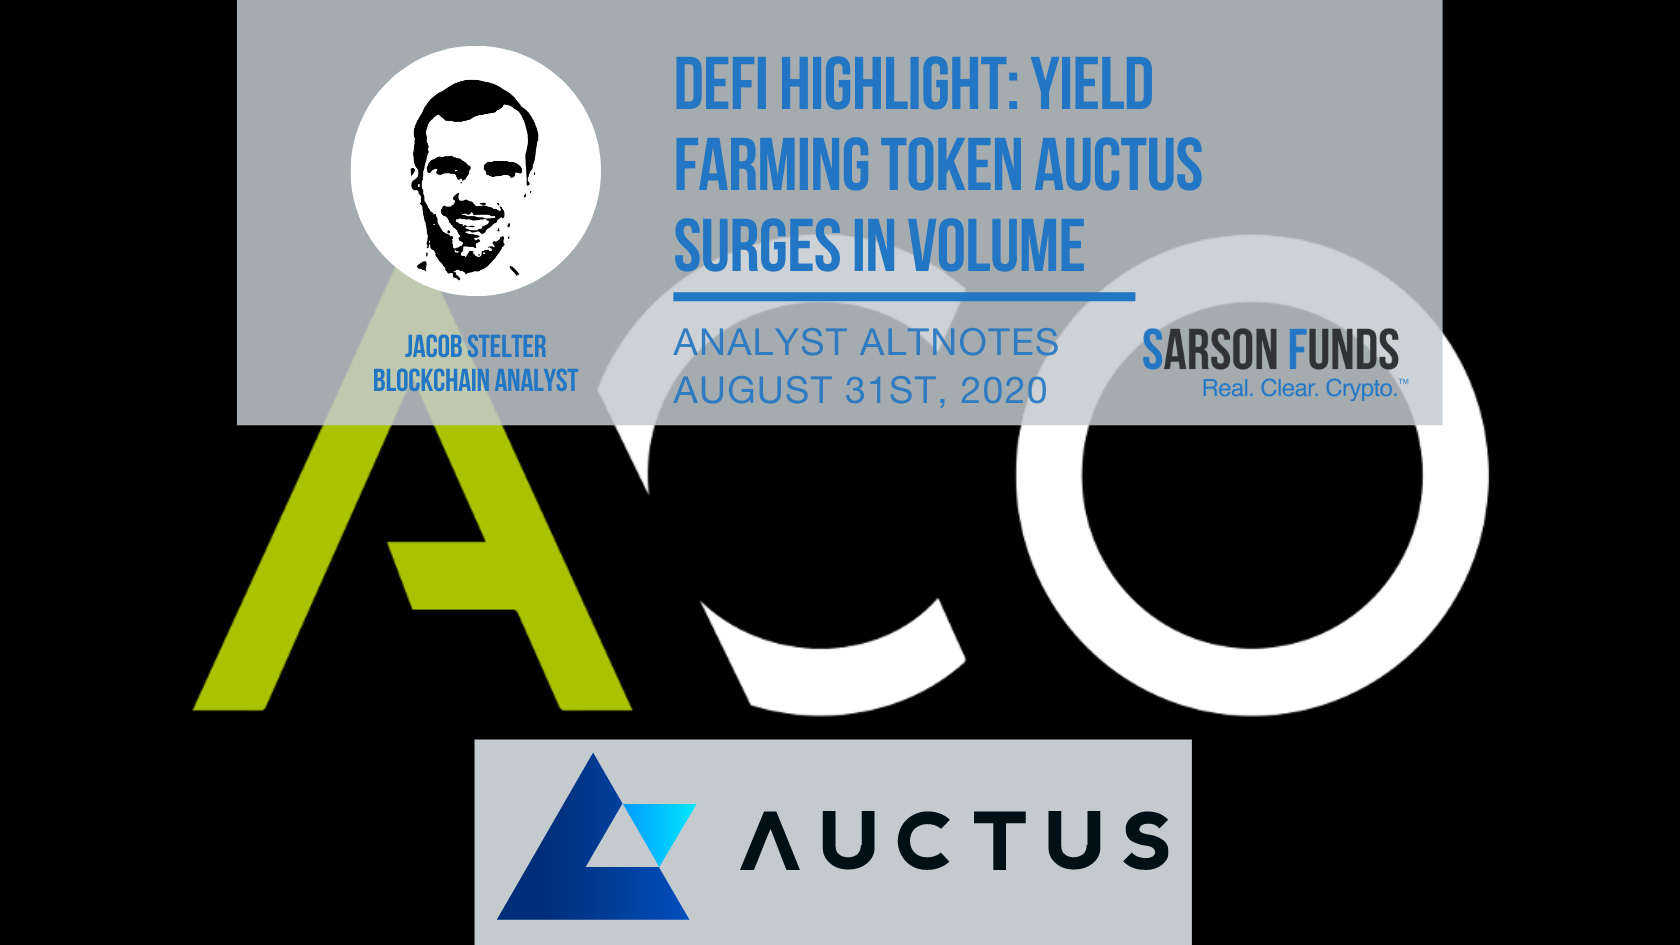 Defi Highlight: Yield Farming Token Auctus Surges in ...